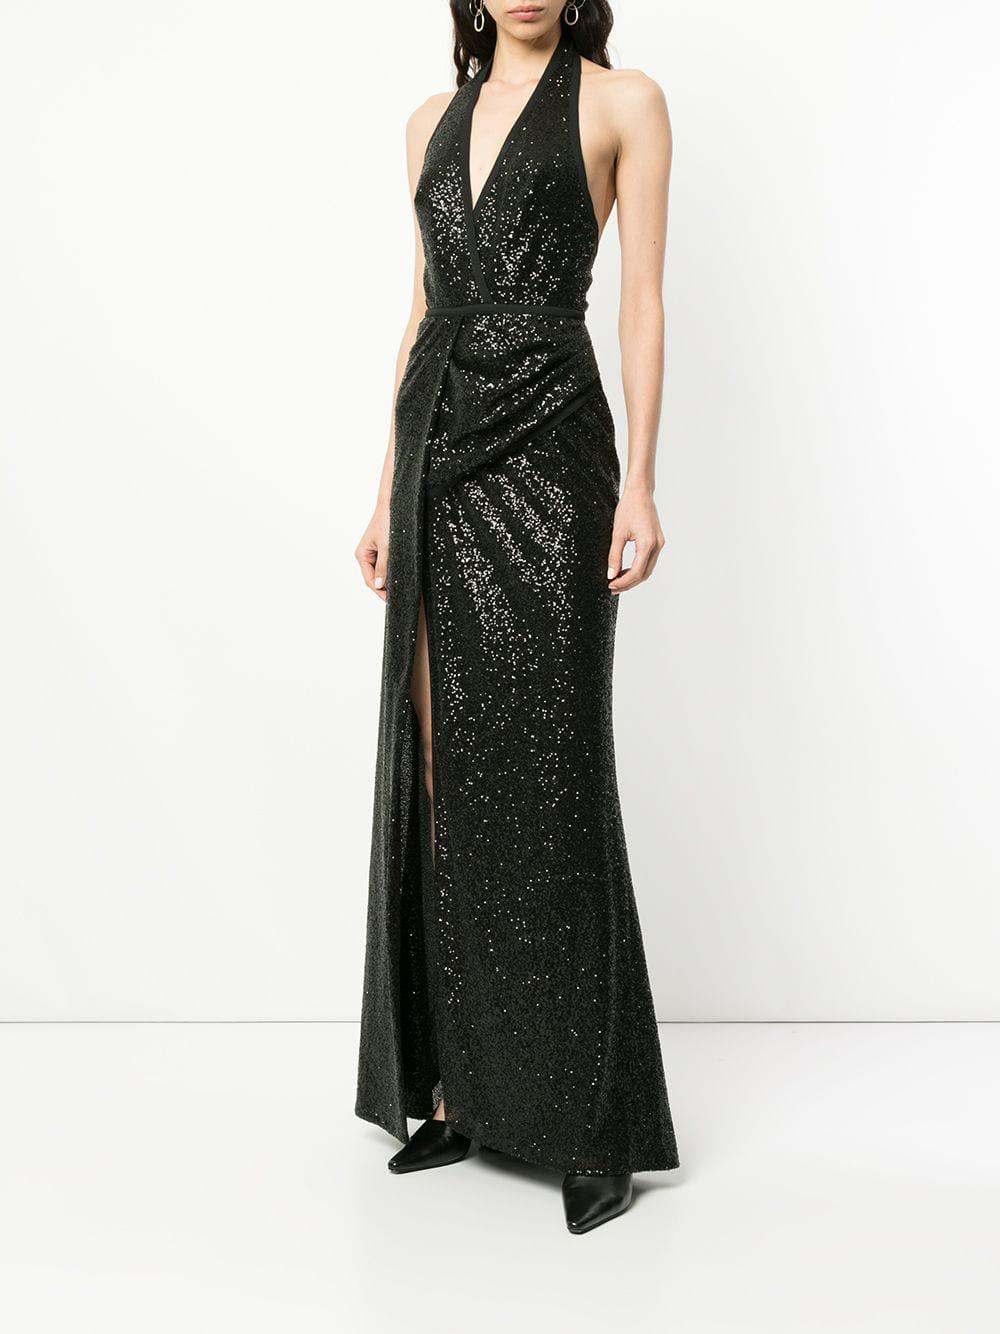 Elie Saab Silk Sequined Draped Waisted Dress in Black - Lyst